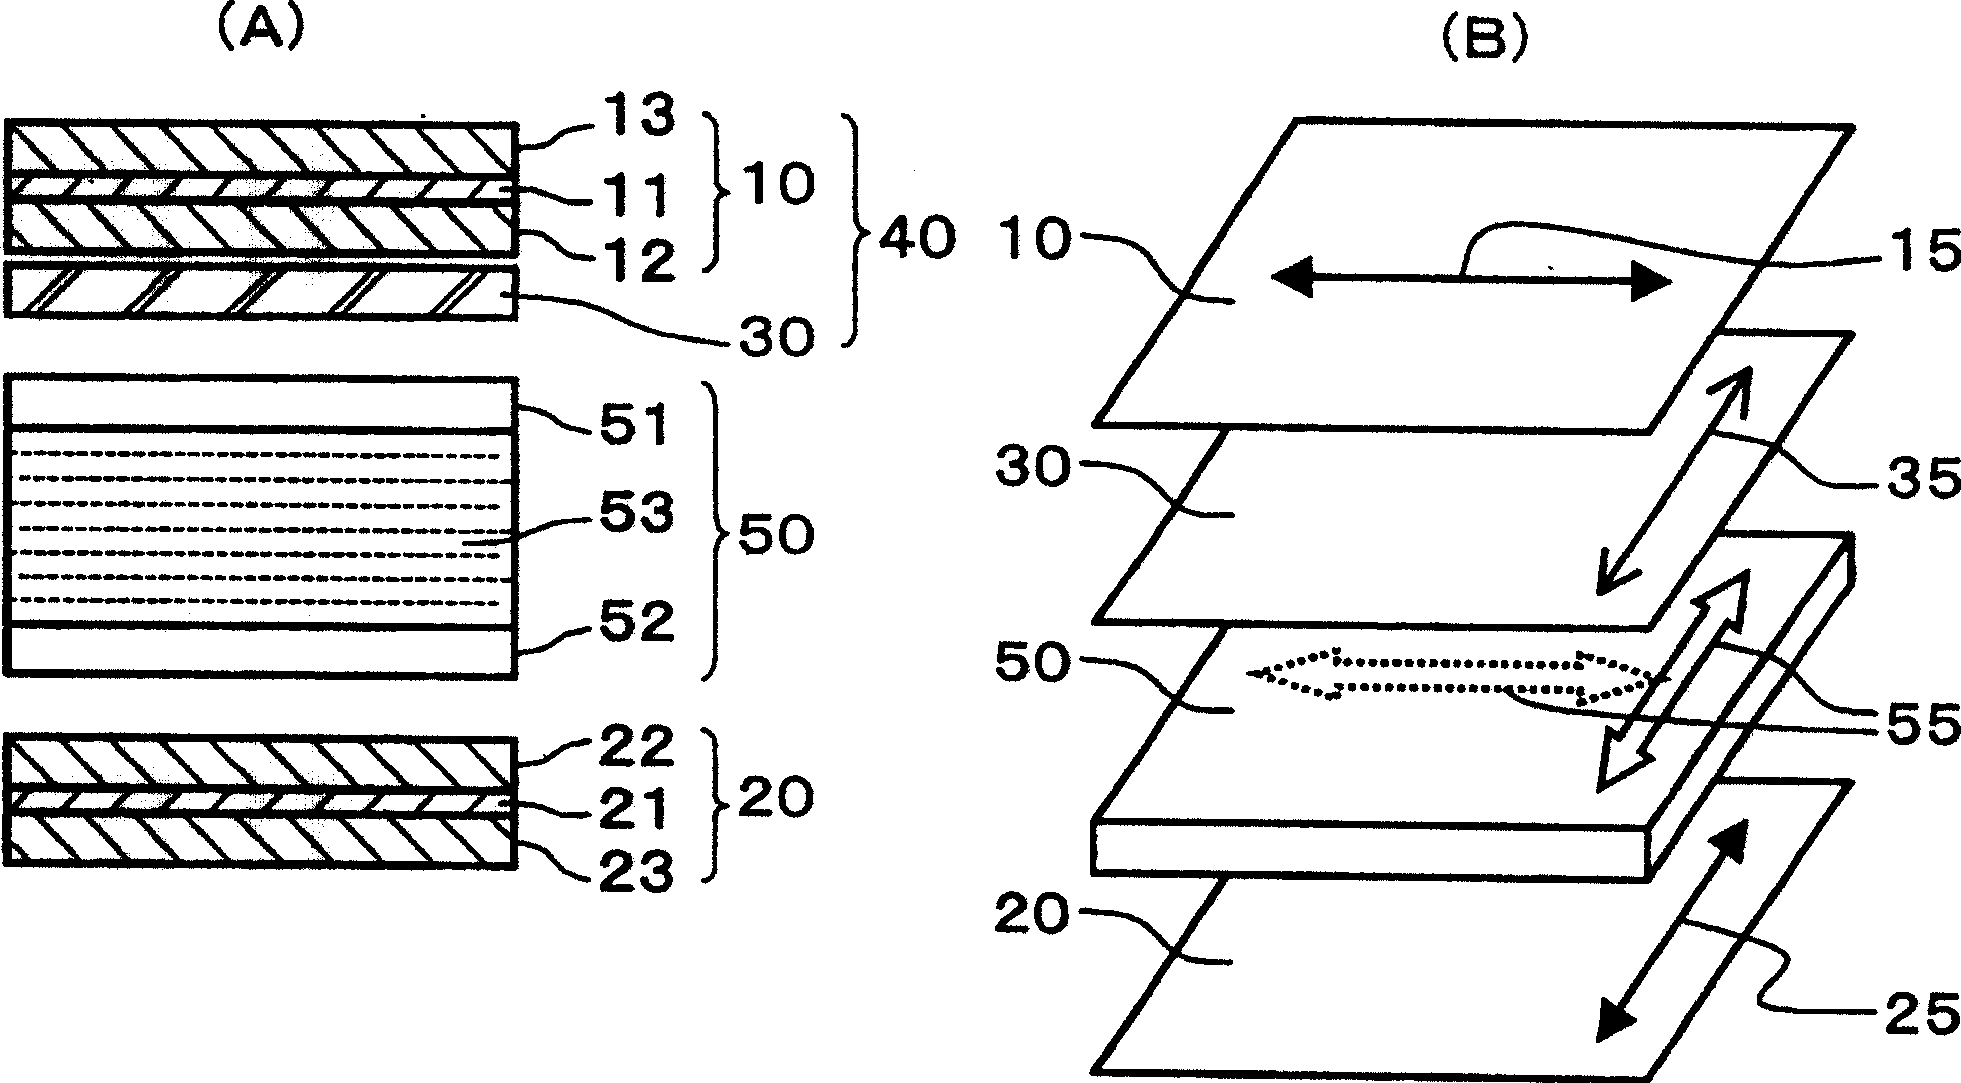 Liquid crystal display device and polarizing disc combination therefor